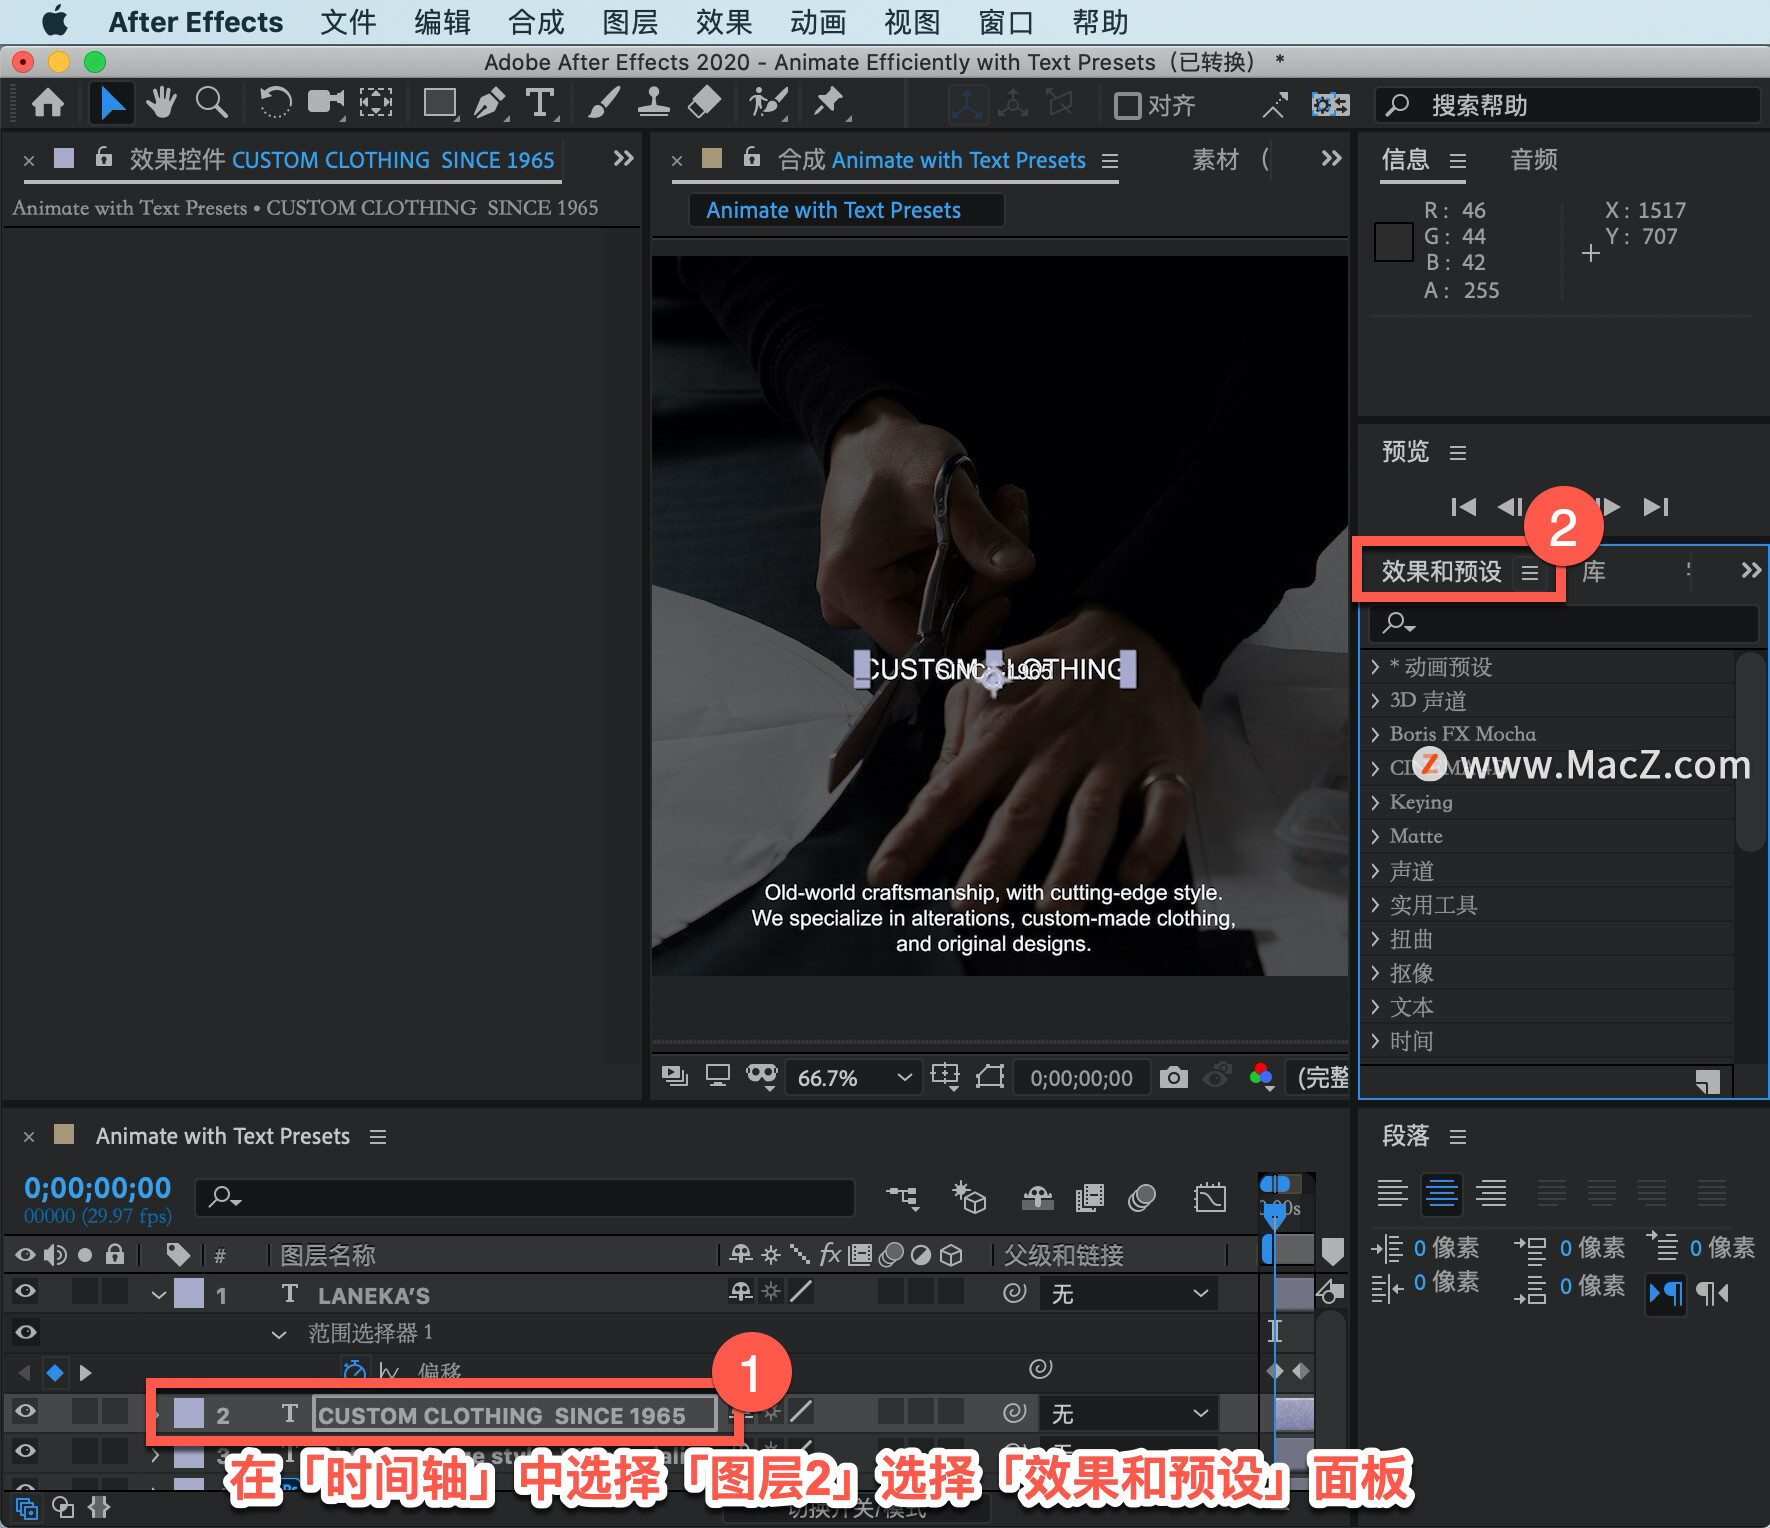 After Effects 教程「16」，如何在 After Effects 中更改动画的时间？